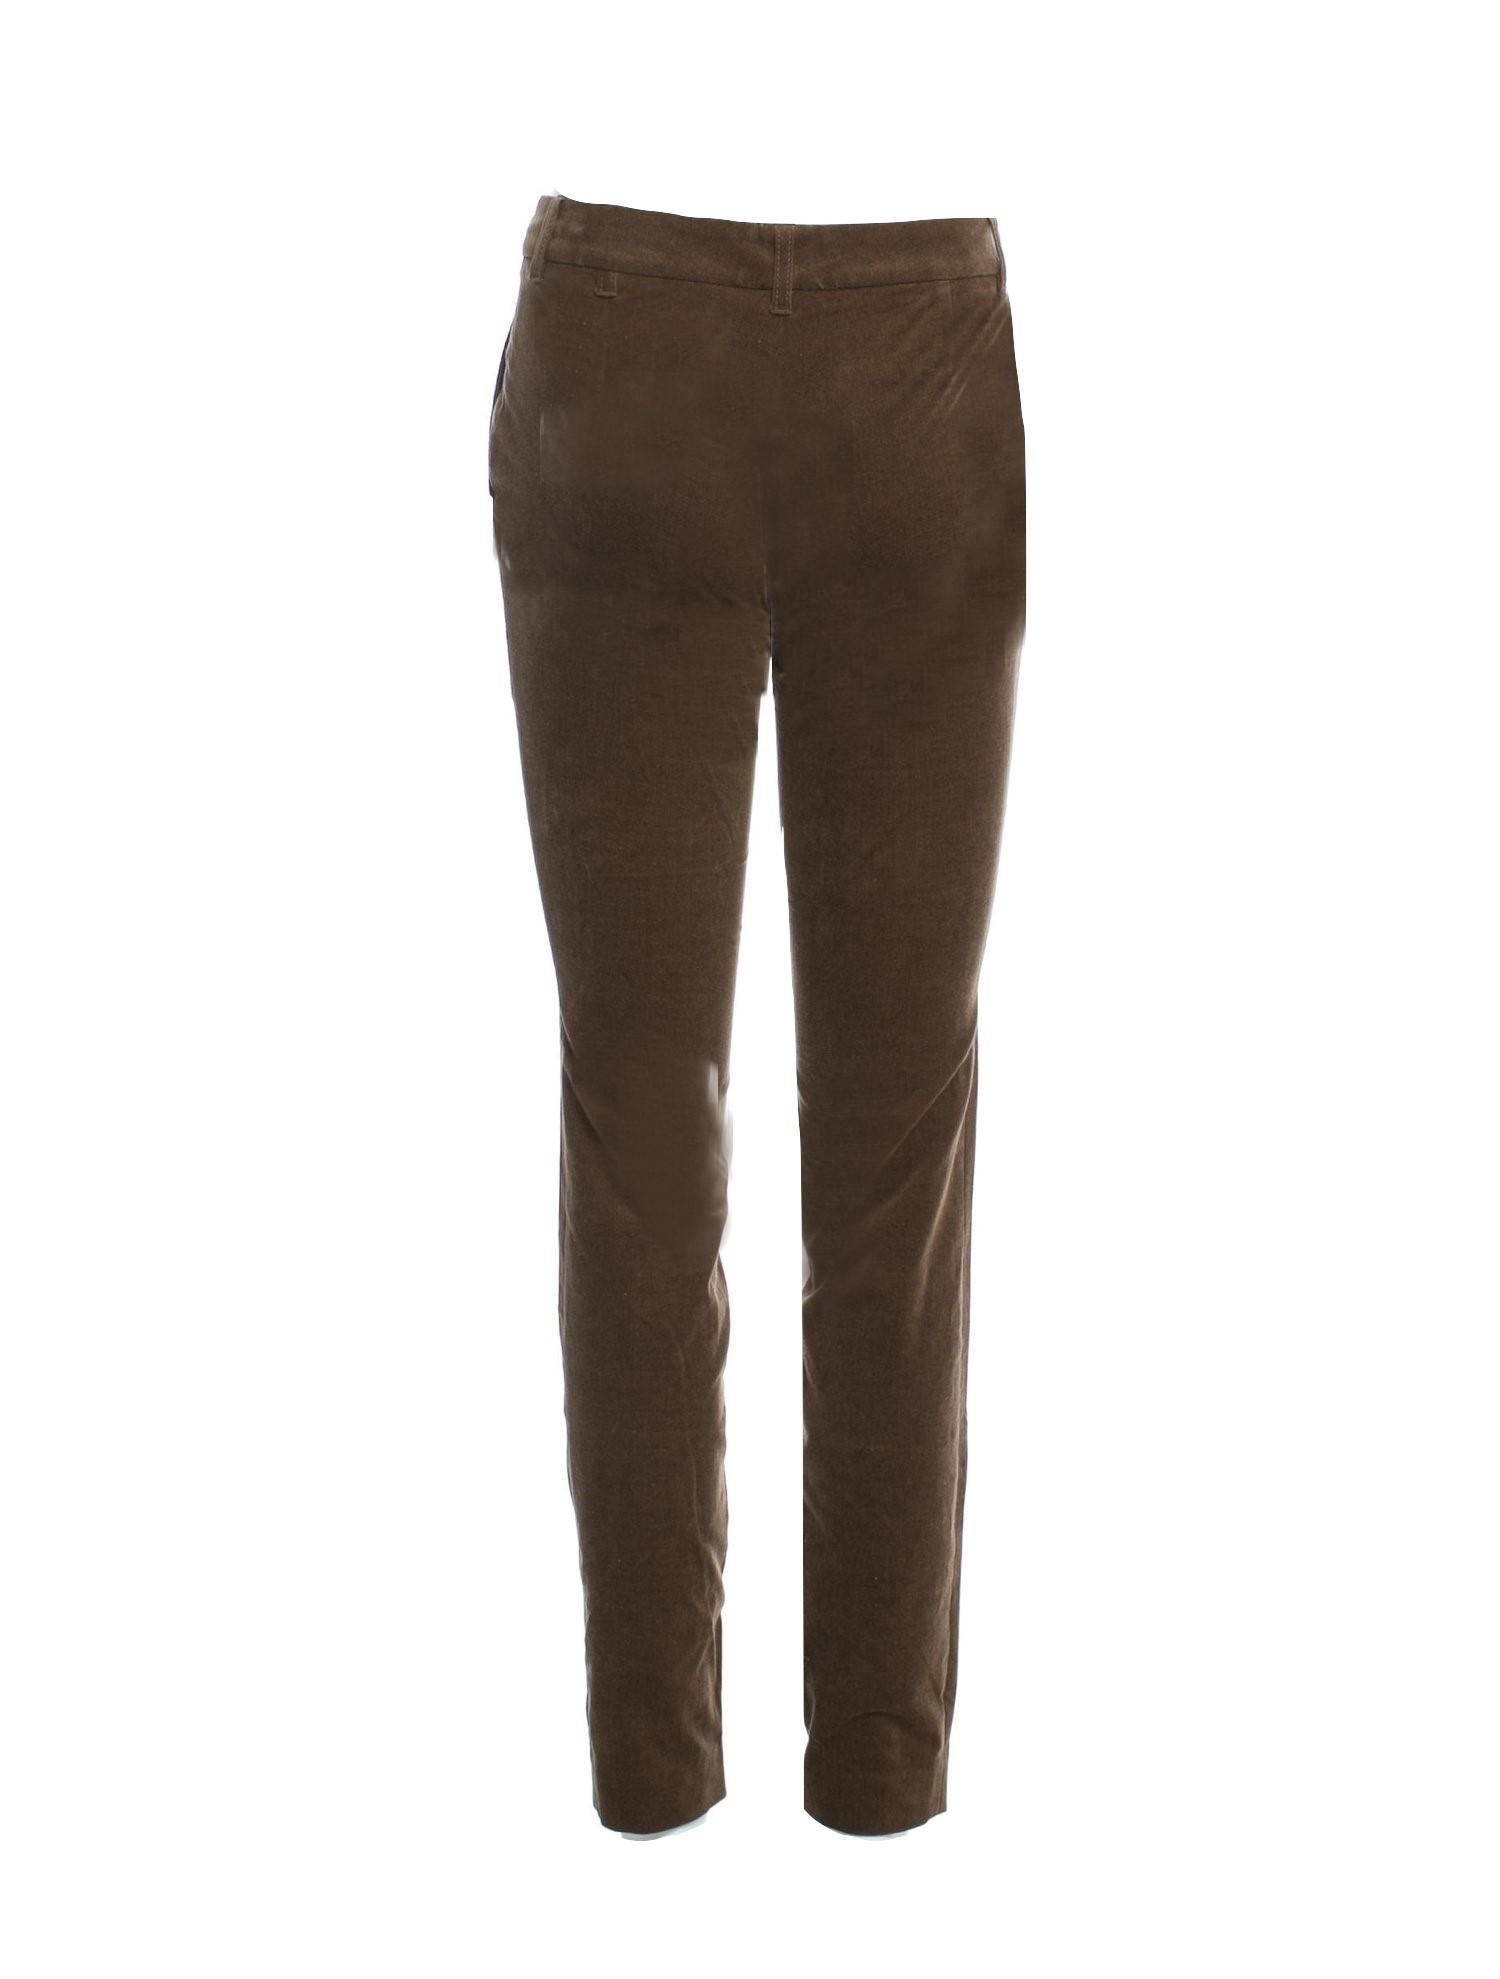 New Gucci Olive Brown Velvet Runway Pants Pre-Fall 2011 Sz 38 $1499 at ...